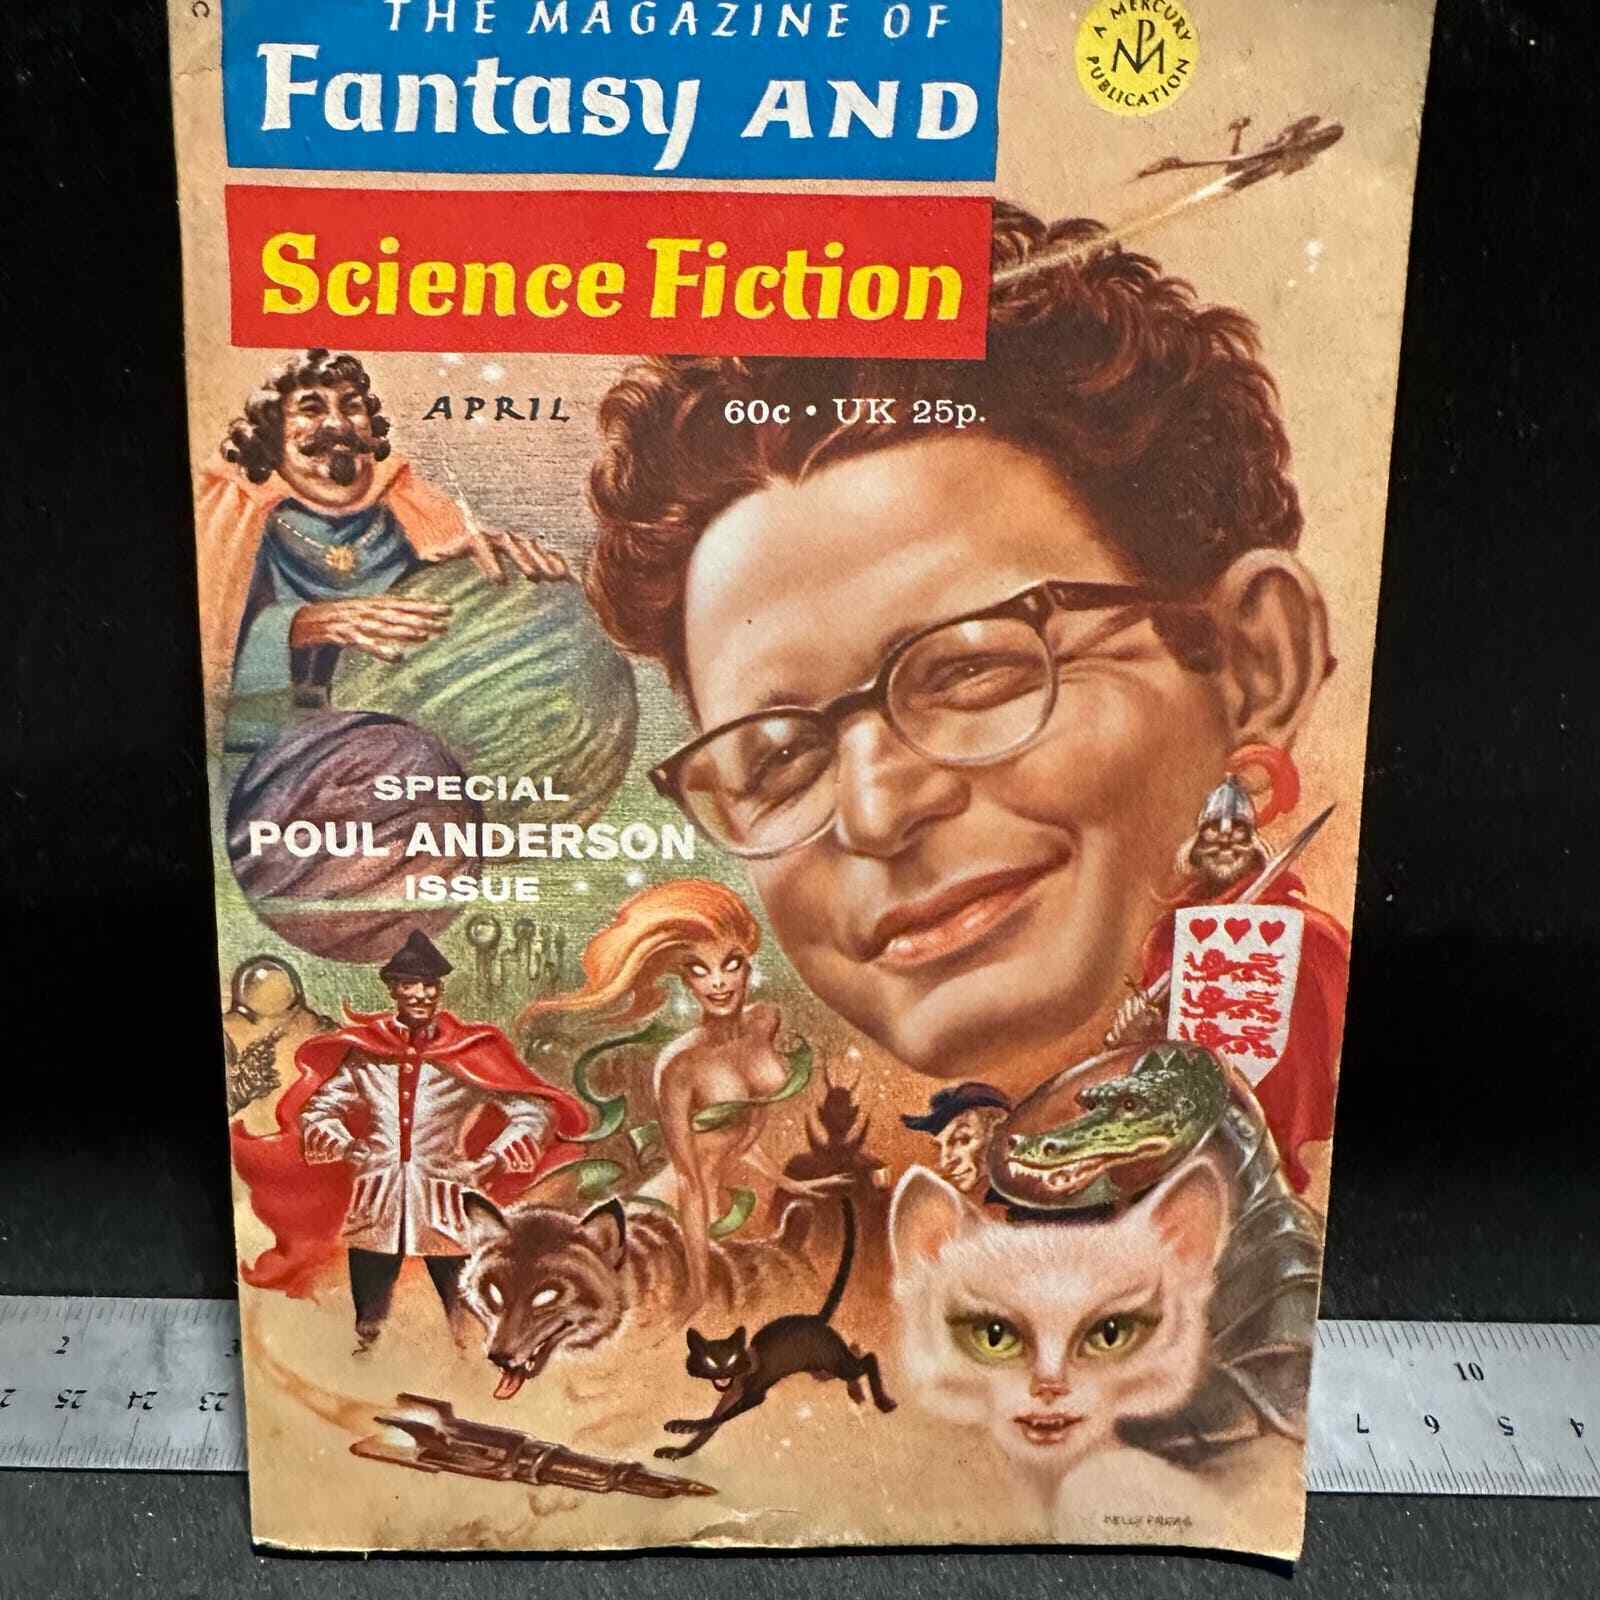 The Magazine of Fantasy and Science-Fiction, April 1971 Special Paul Anderson